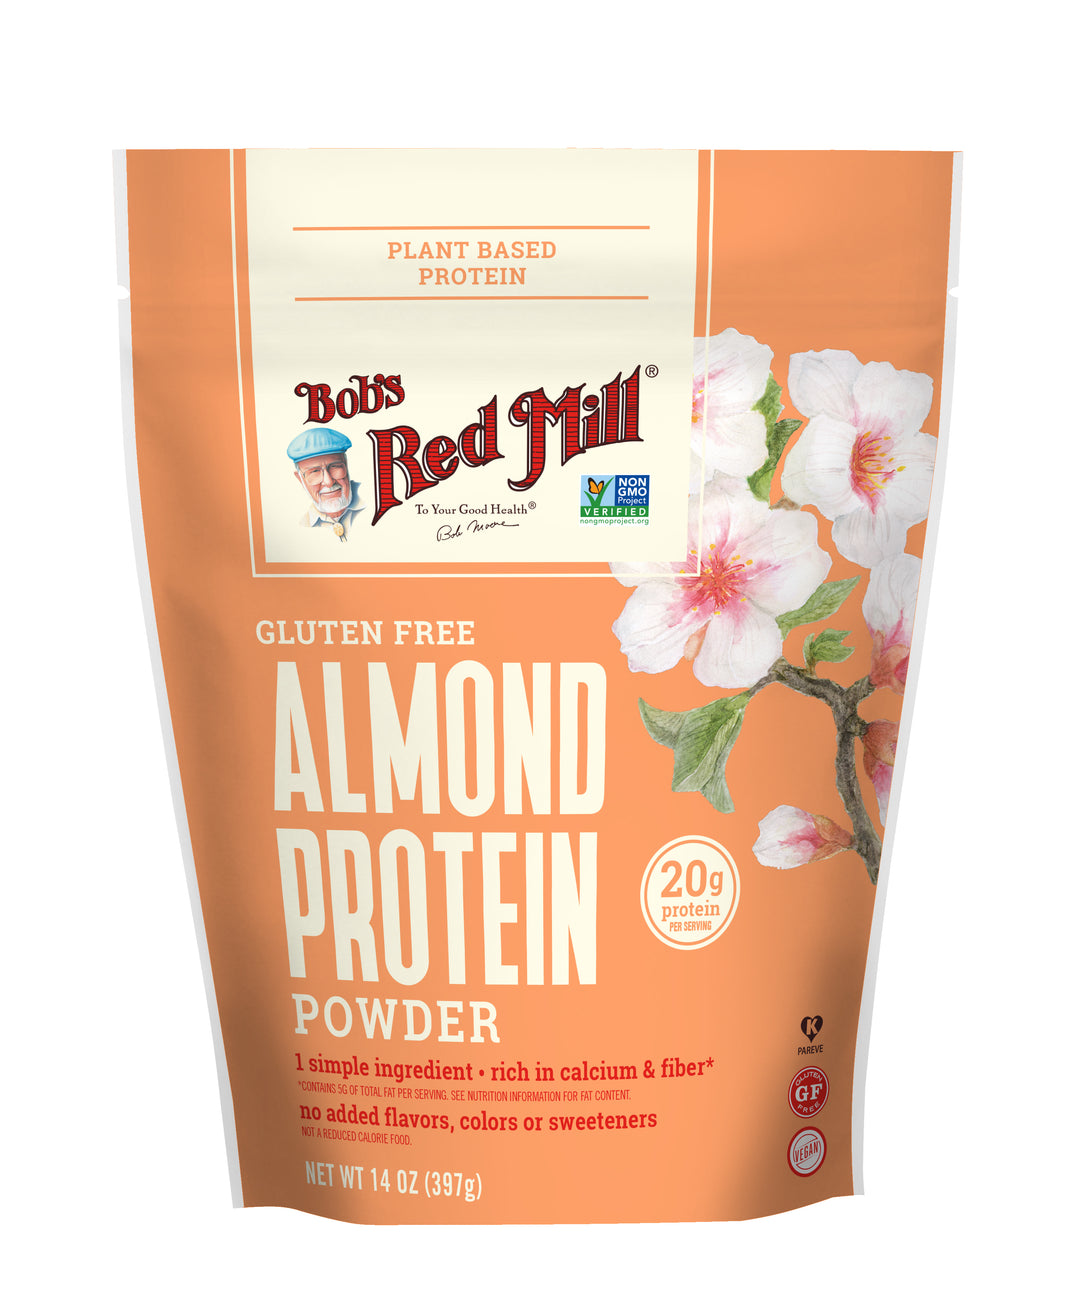 Bob's Red Mill Natural Foods Inc Almond Protein Powder-14 oz.-4/Case